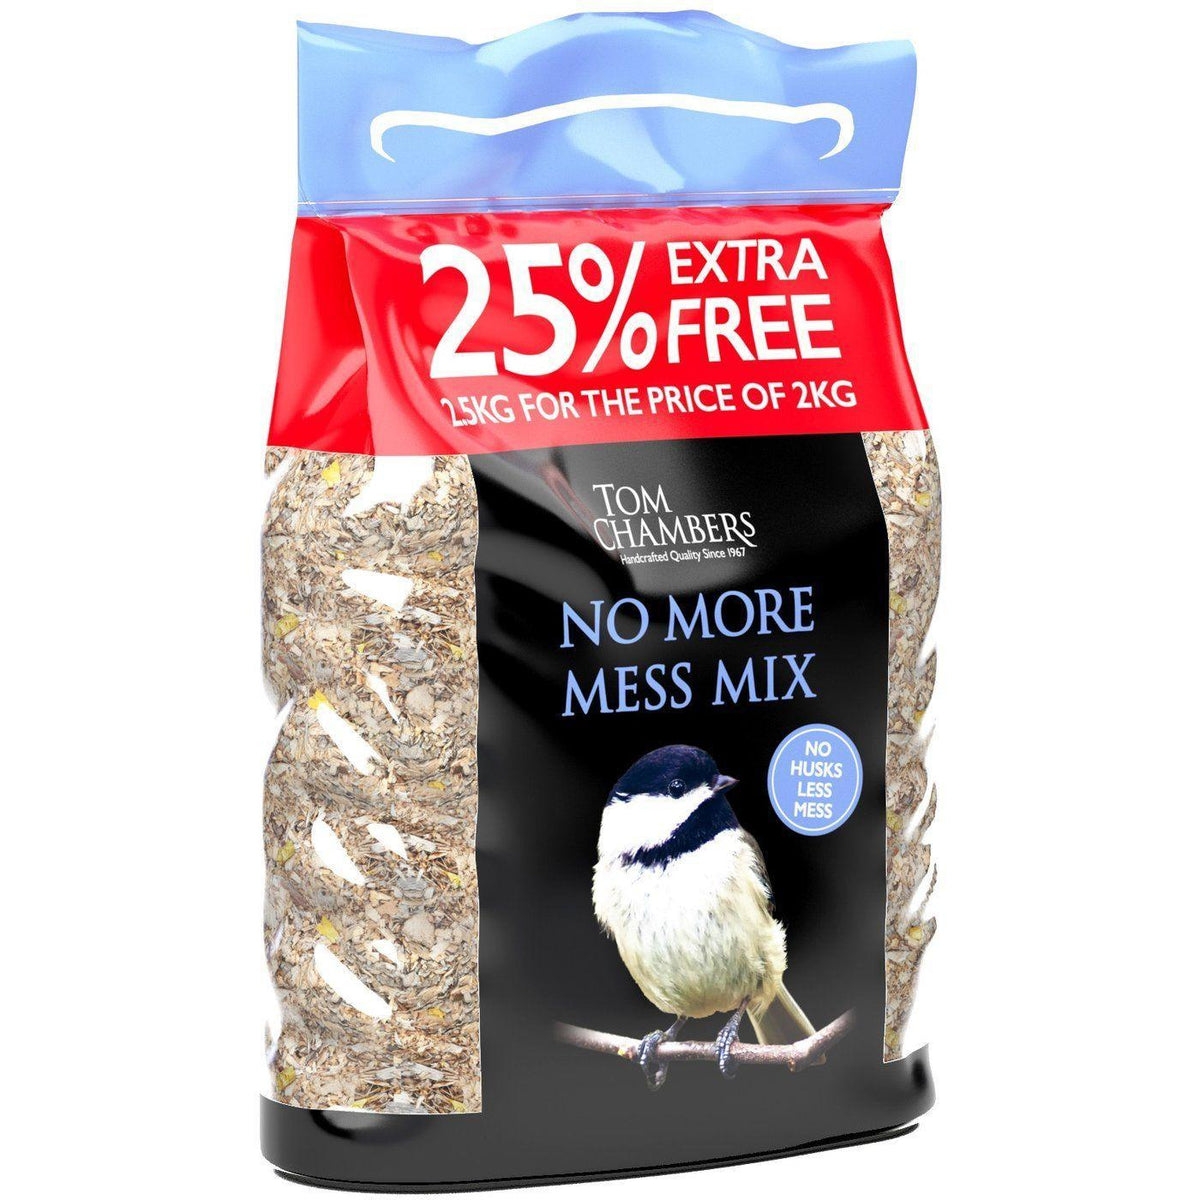 Tom Chambers No More Mess Mix | 25% Extra Free | 2.5kg For The Price of 2kg - Choice Stores